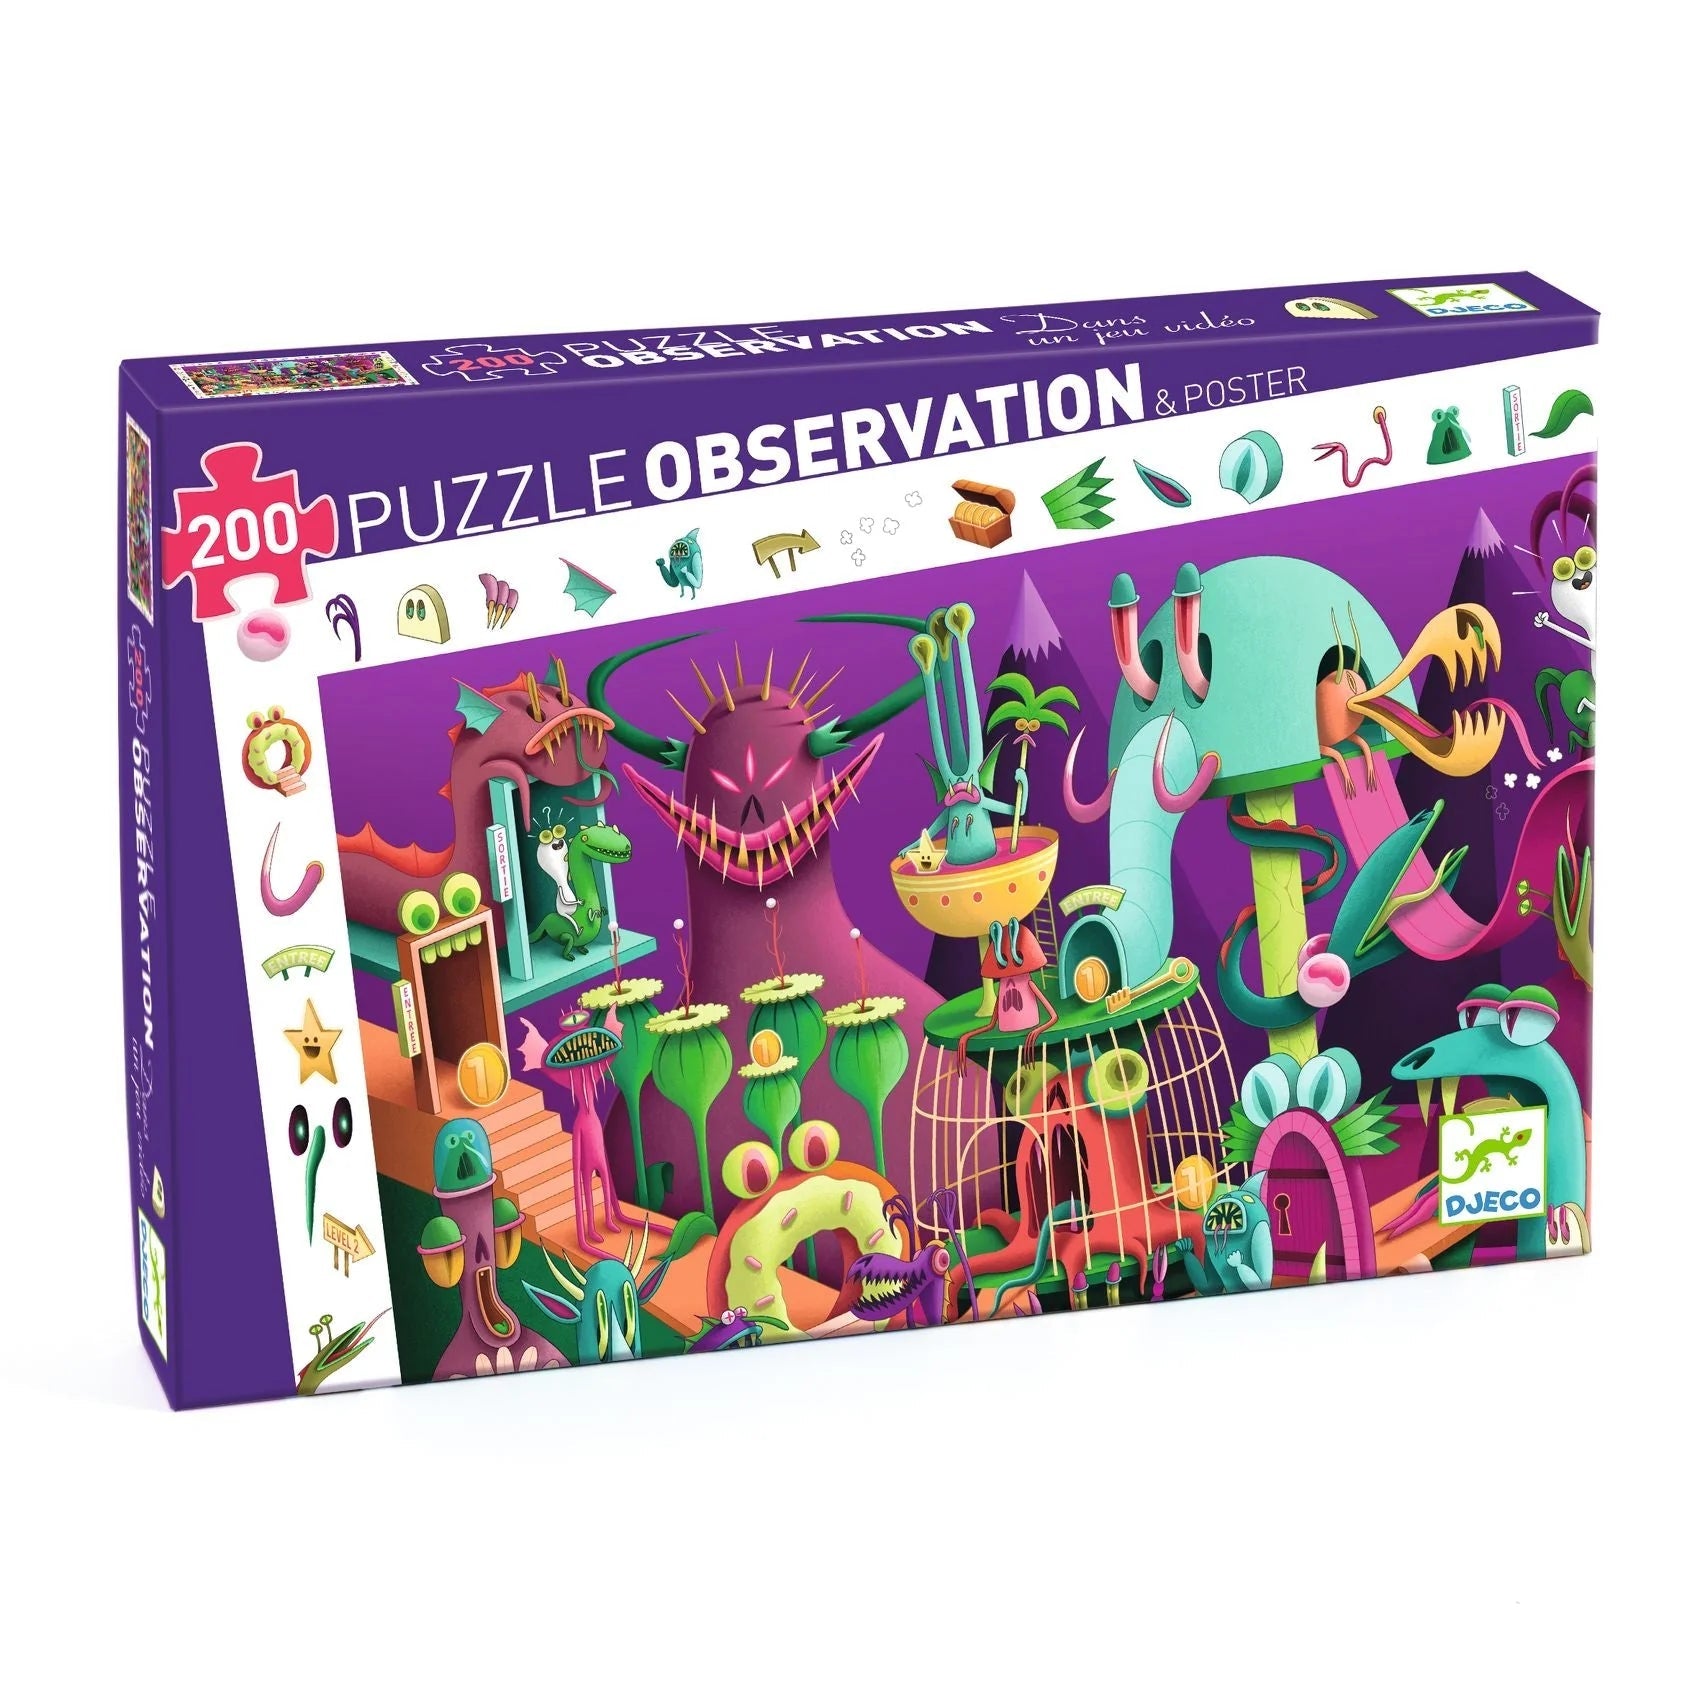 Djeco Observation Puzzle -- In a Video Game, 200 pieces